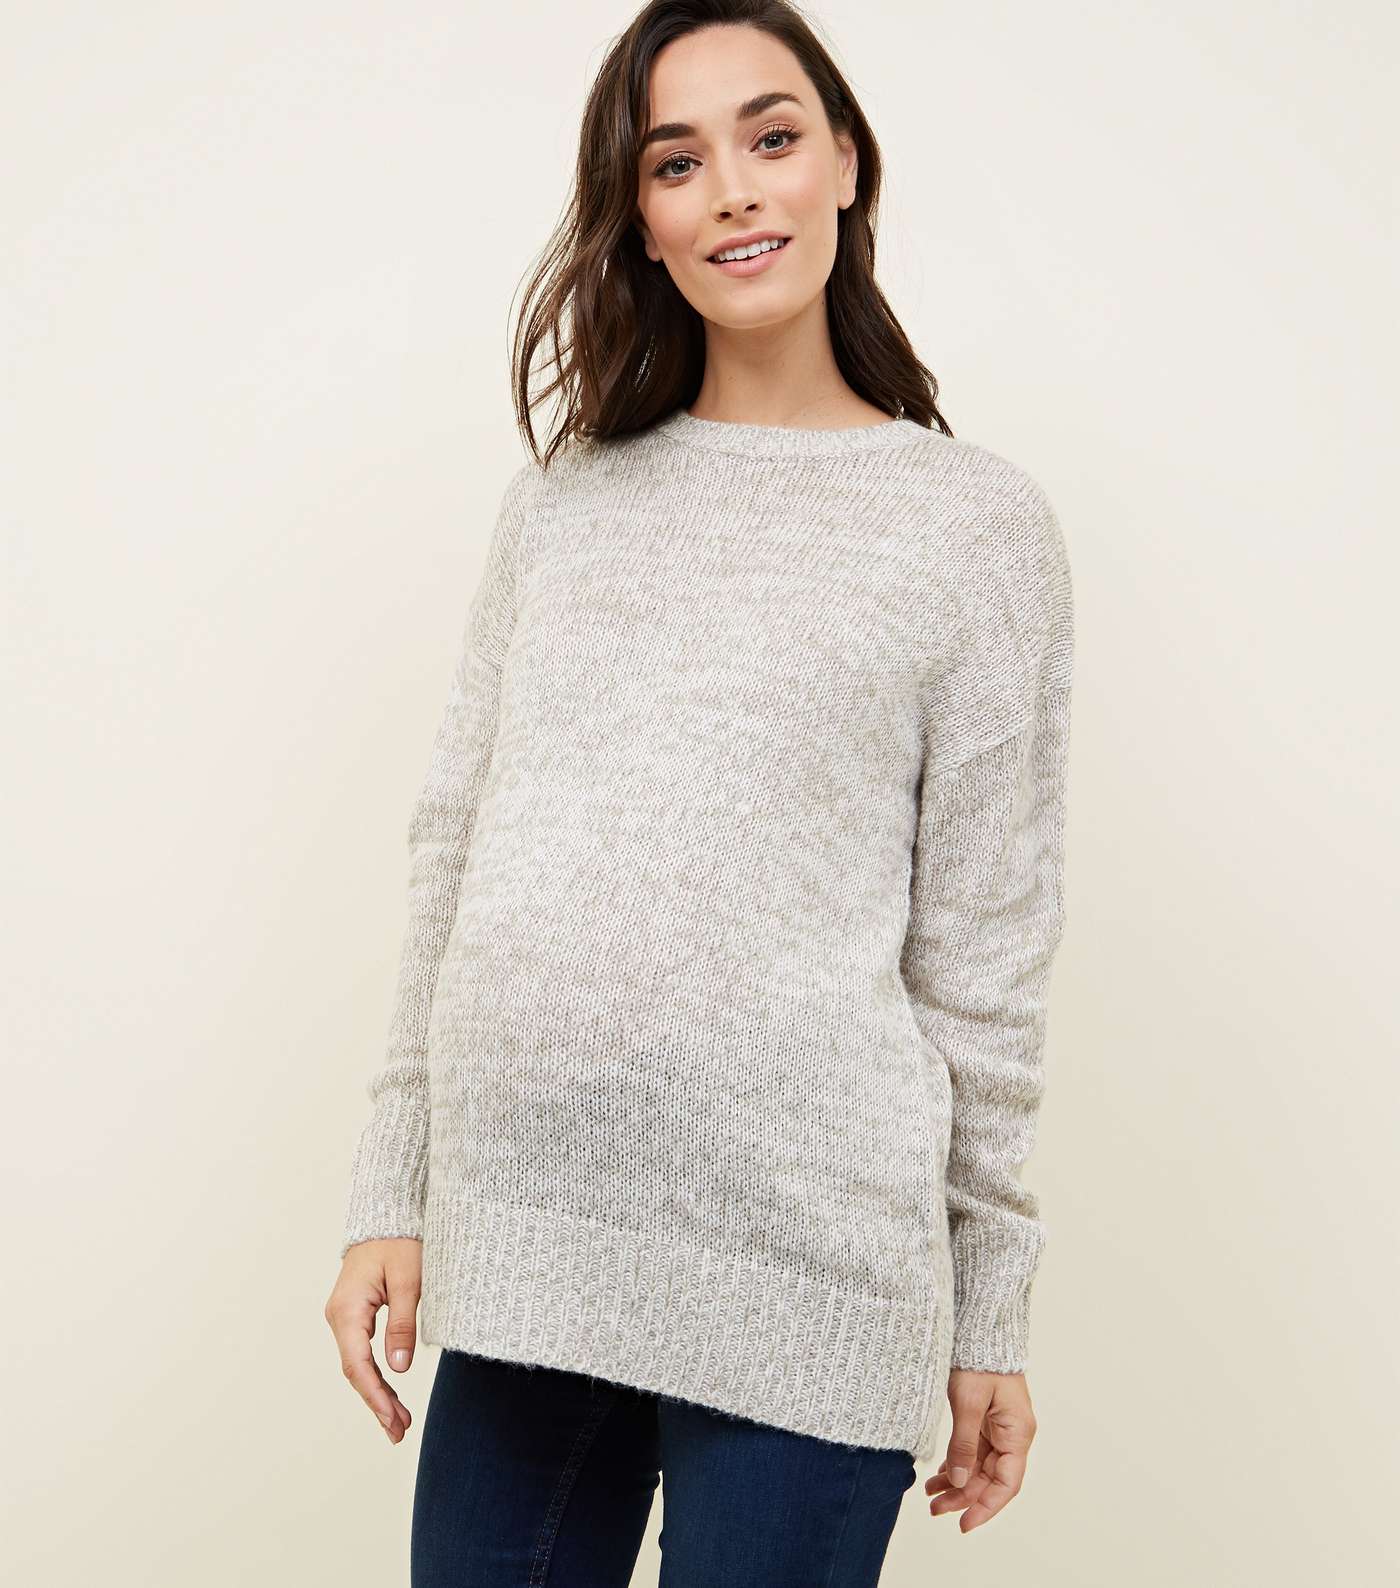 Maternity Pale Grey Knitted Jumper